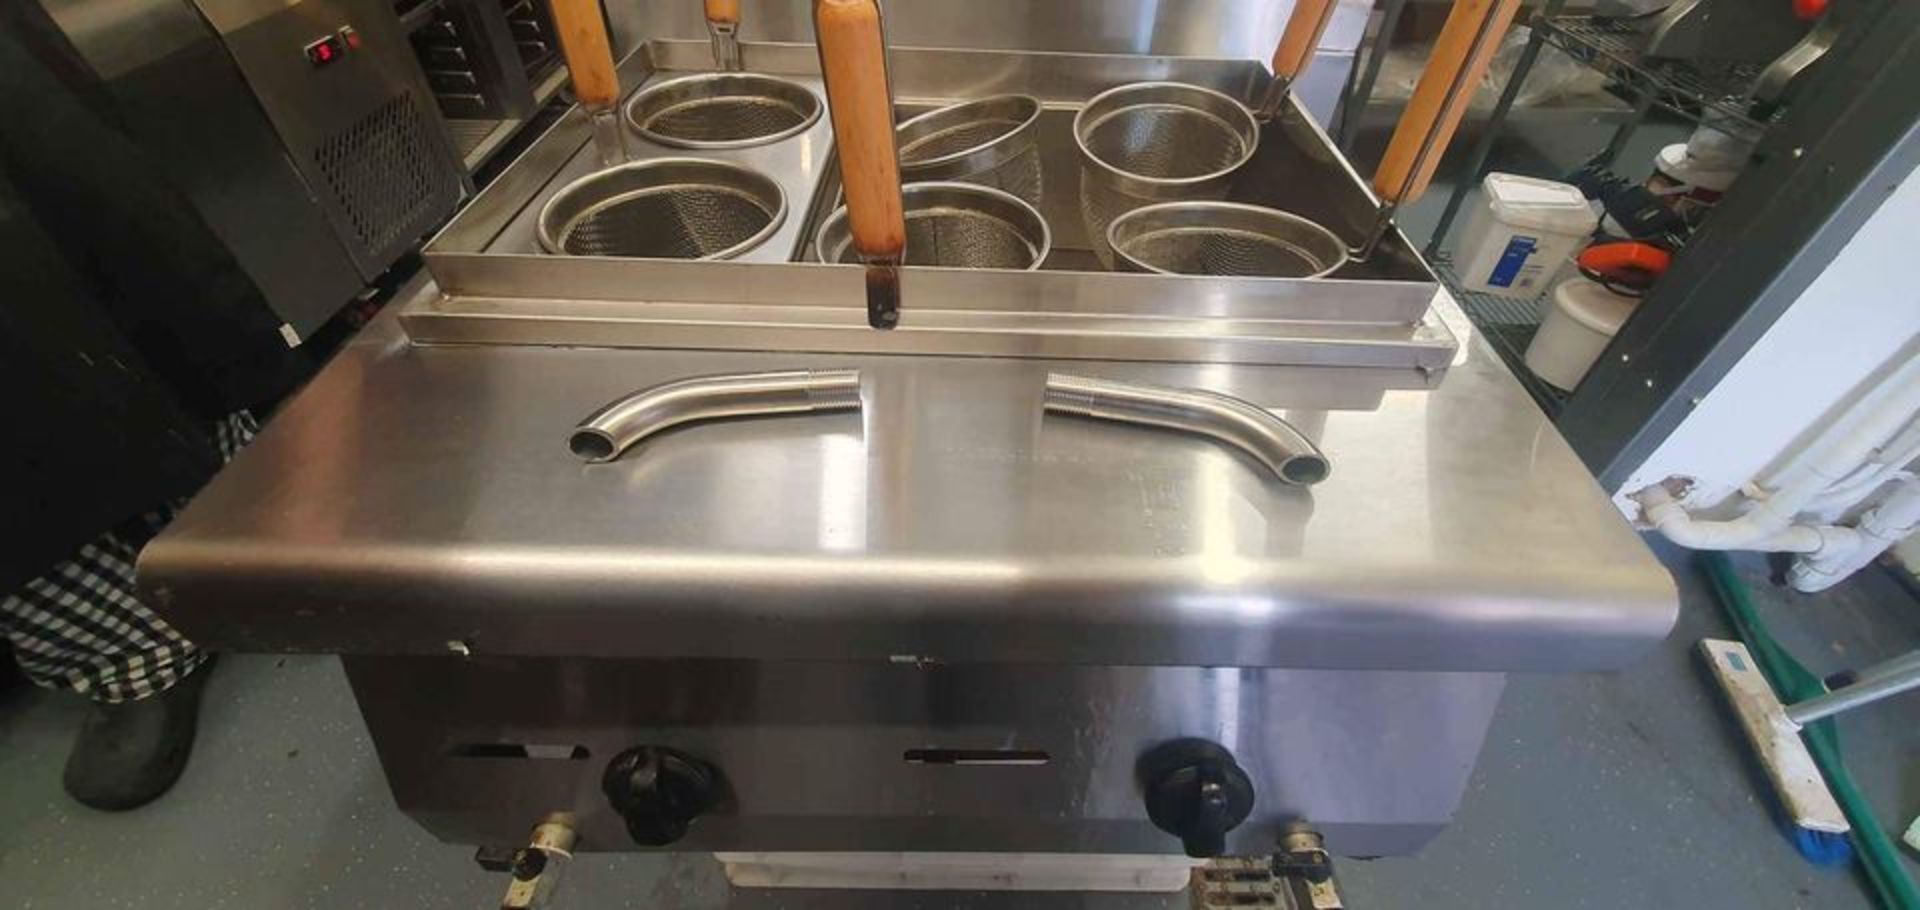 Gas Powered Commercial Pasta Cooker and Bain Marie - Image 3 of 6